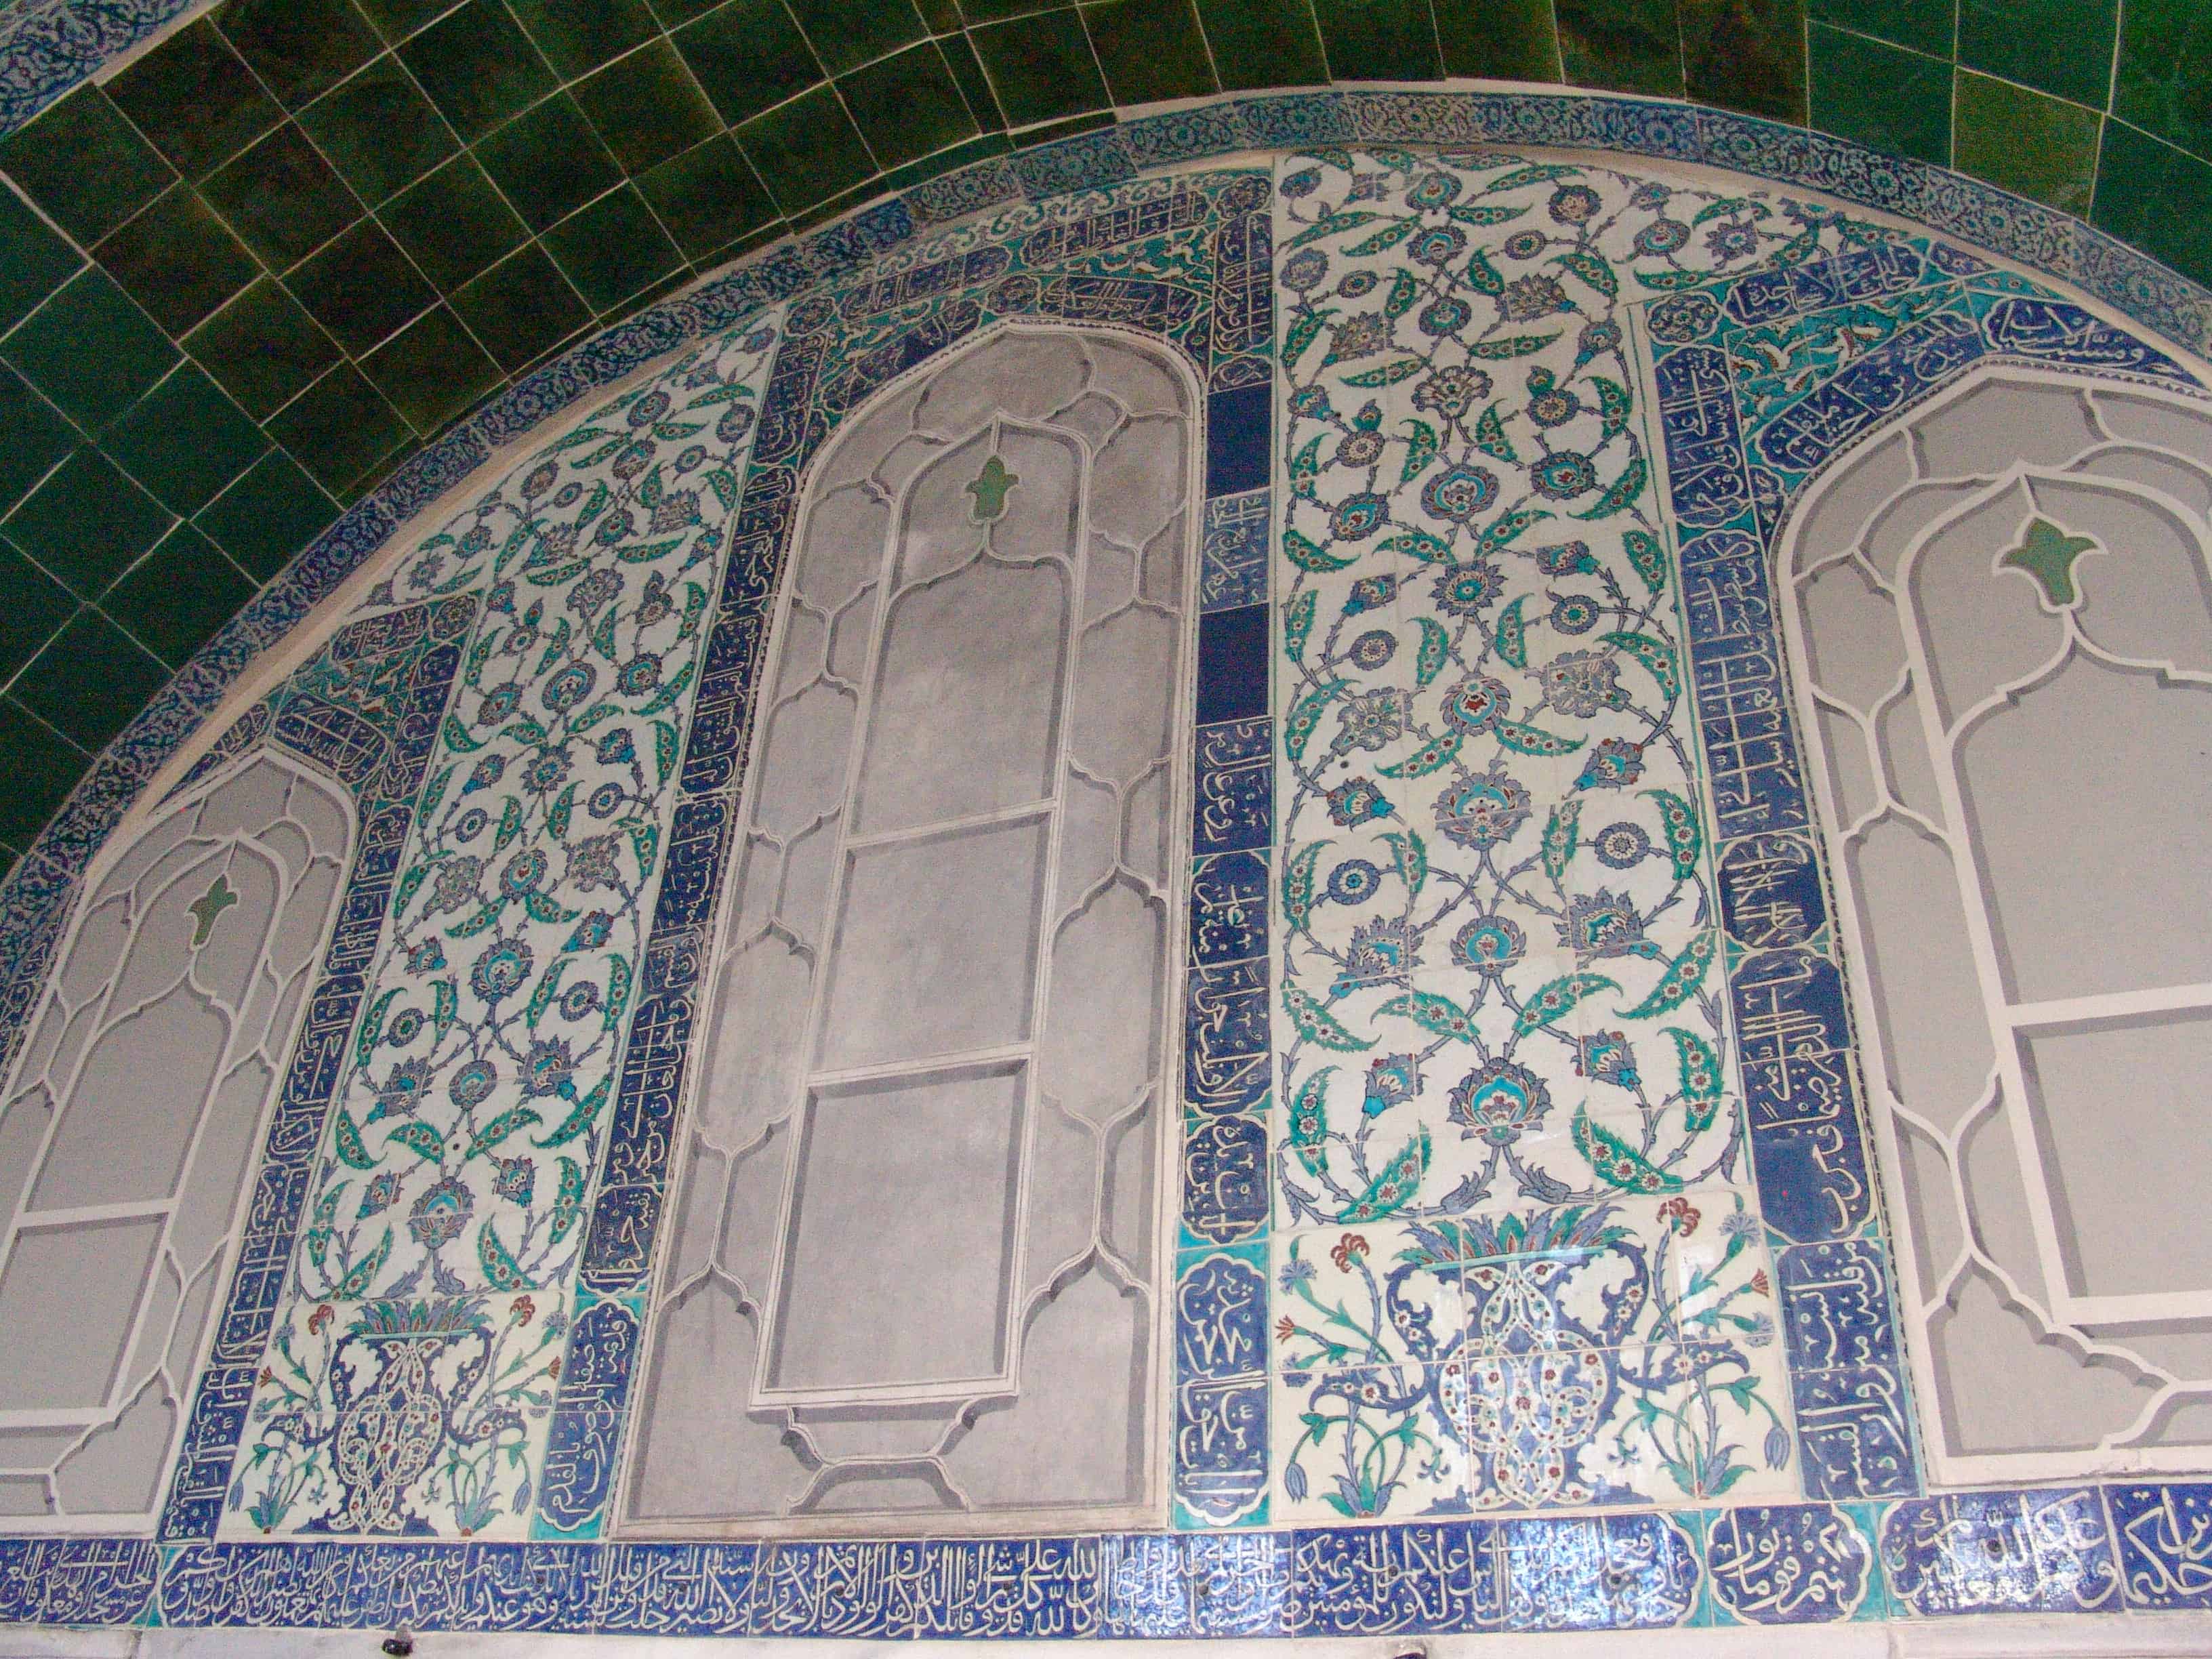 Tiles in the Privy Chamber of Ahmed I in the Imperial Harem at Topkapi Palace in Istanbul, Turkey